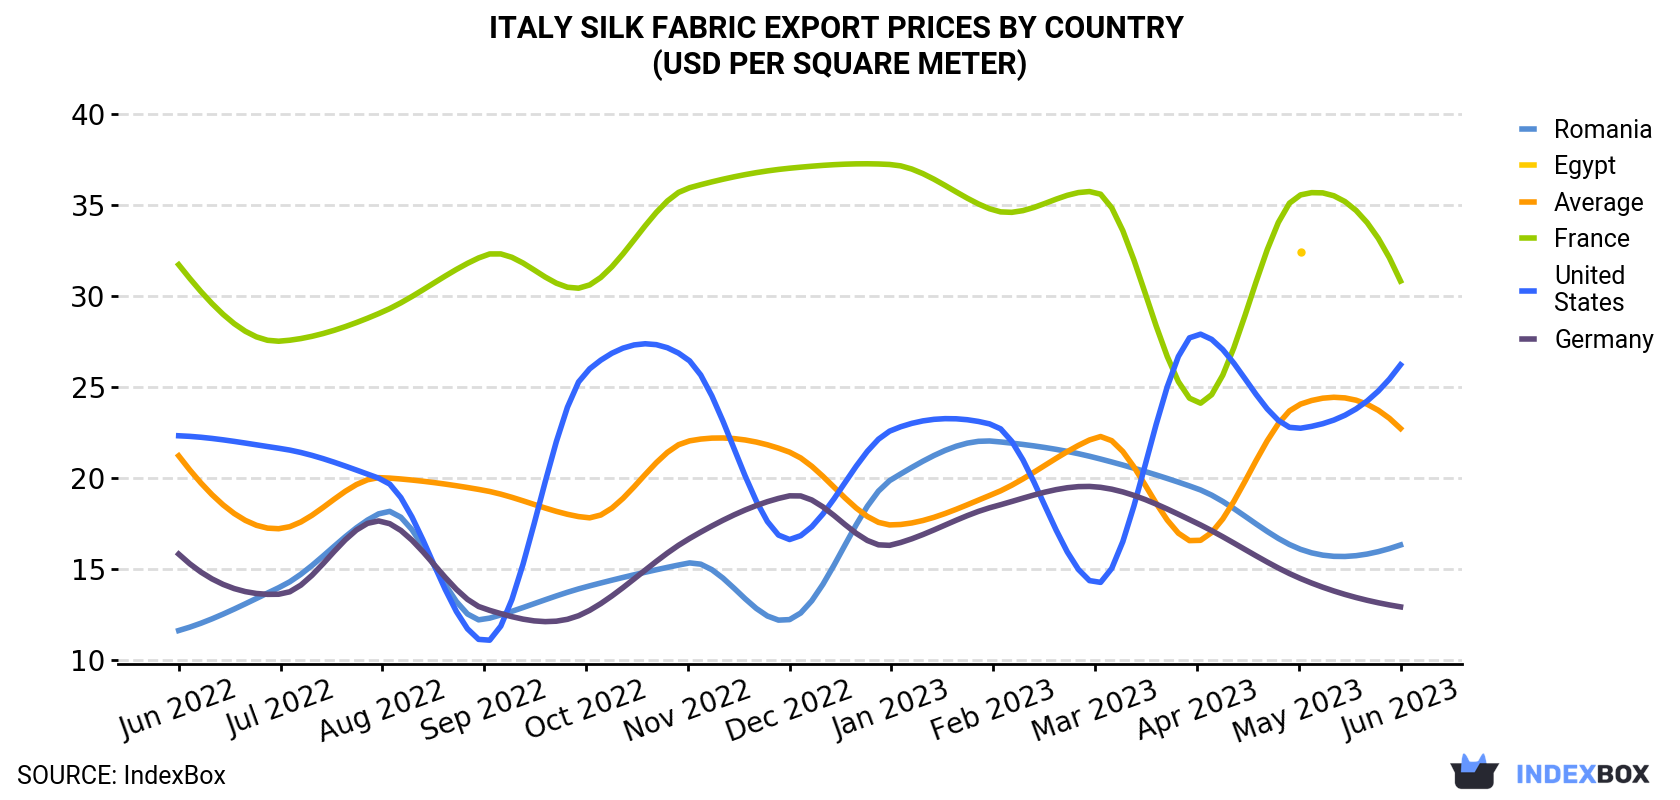 Italy Silk Fabric Export Prices By Country (USD Per Square Meter)